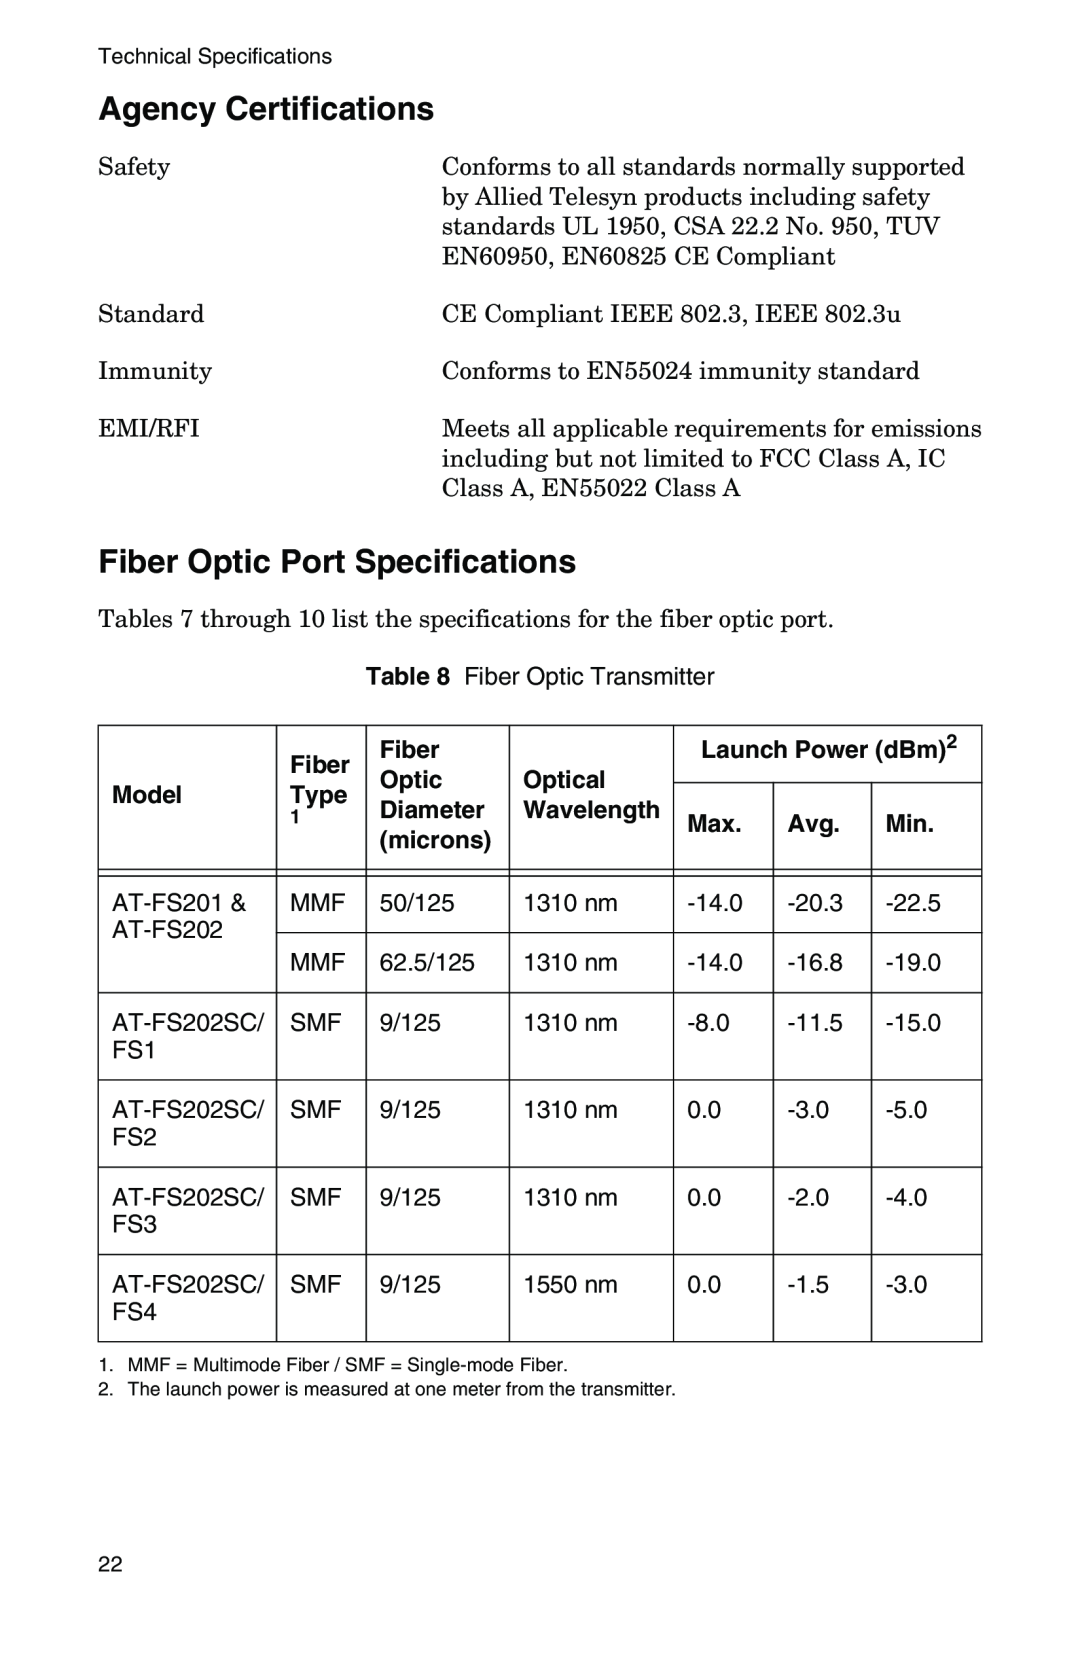 IBM AT-FS202SC/FS2, AT-FS202SC/FS4, AT-FS202SC/FS1, AT-FS201 manual Agency Certifications, Fiber Optic Port Specifications 